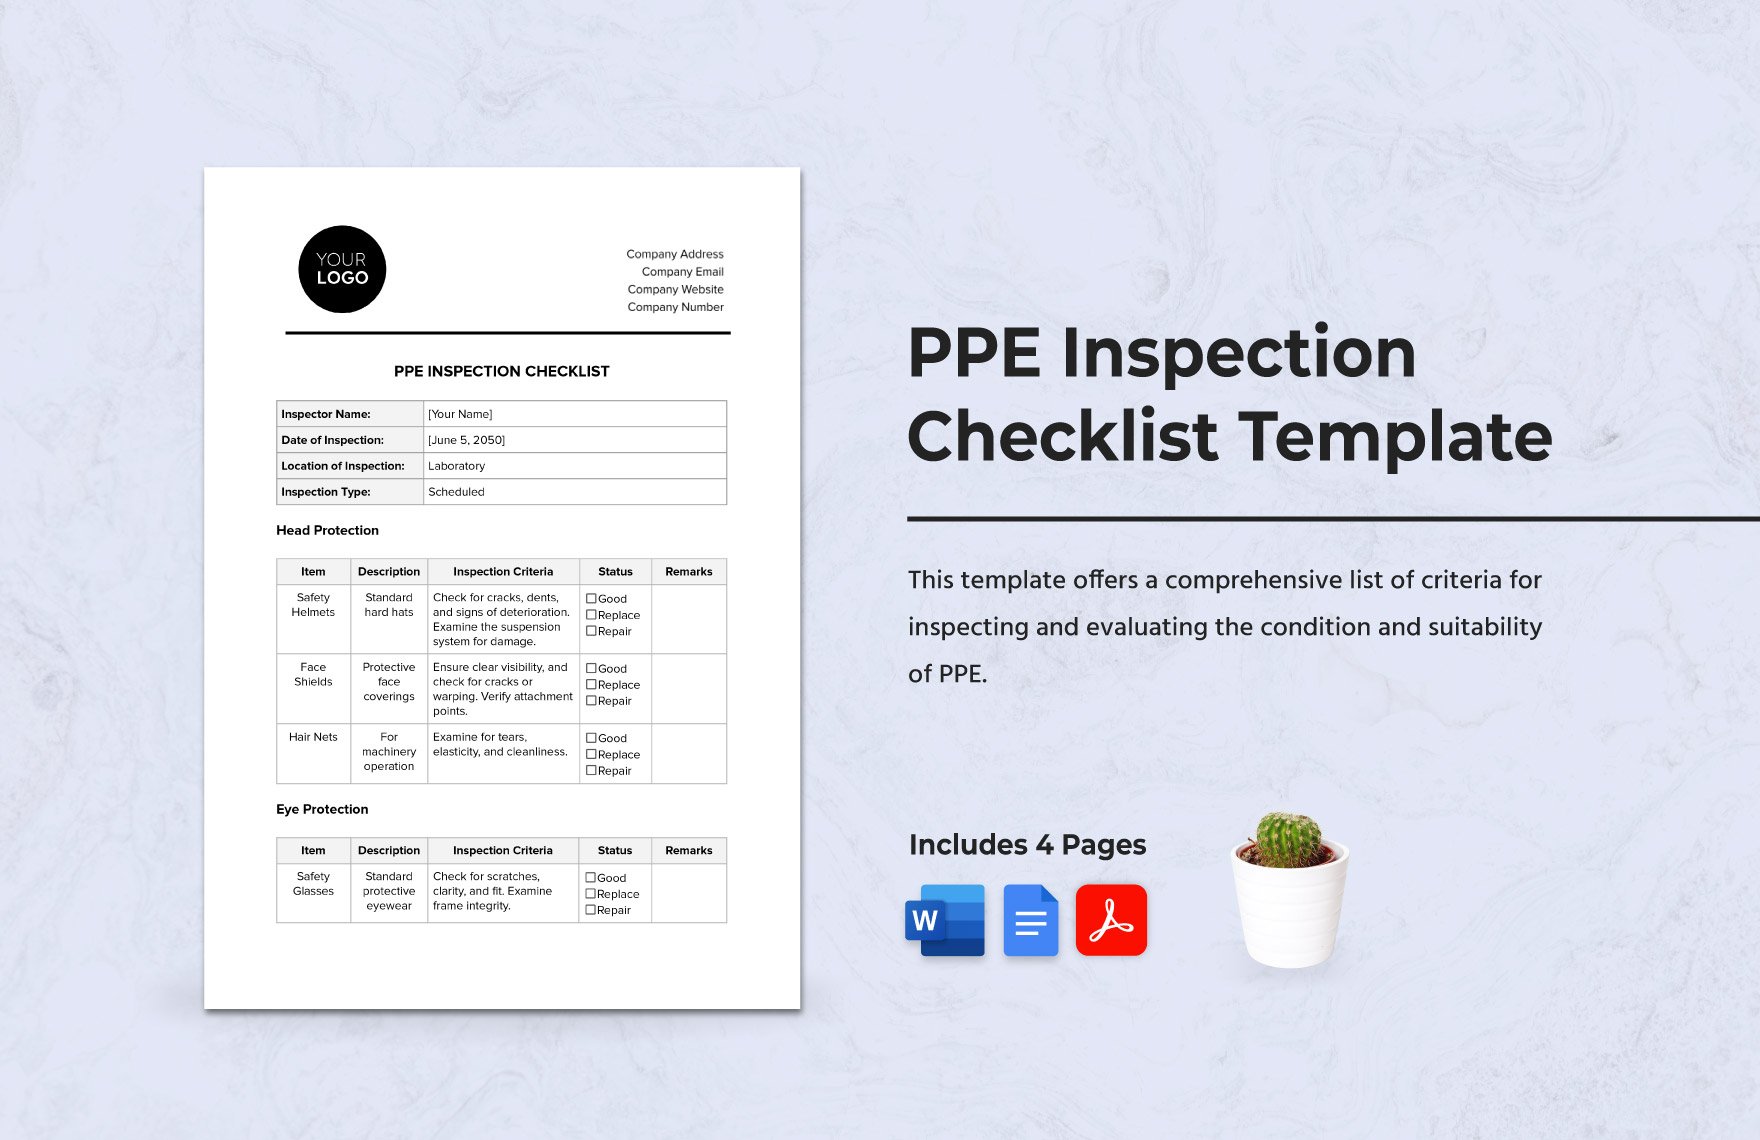 PPE Inspection Checklist Template